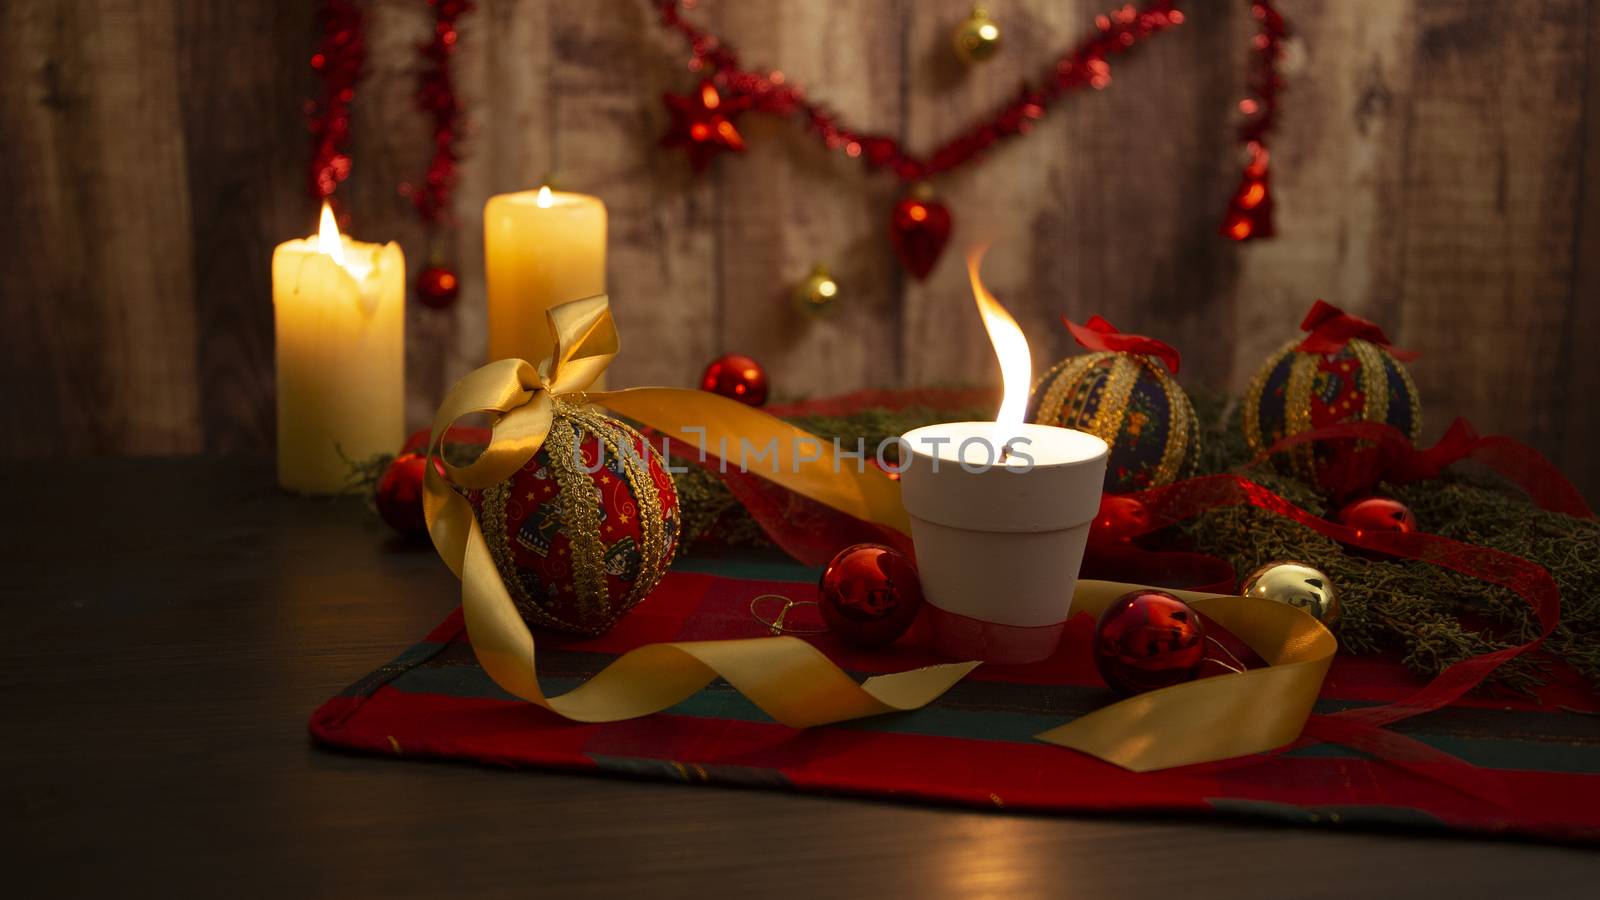 Lit candle with big flame on Christmas table cloth with around pine branches, decoupage baubles, with lit candles and hanging Christmas decoration on wooden background with bokeh effect by robbyfontanesi